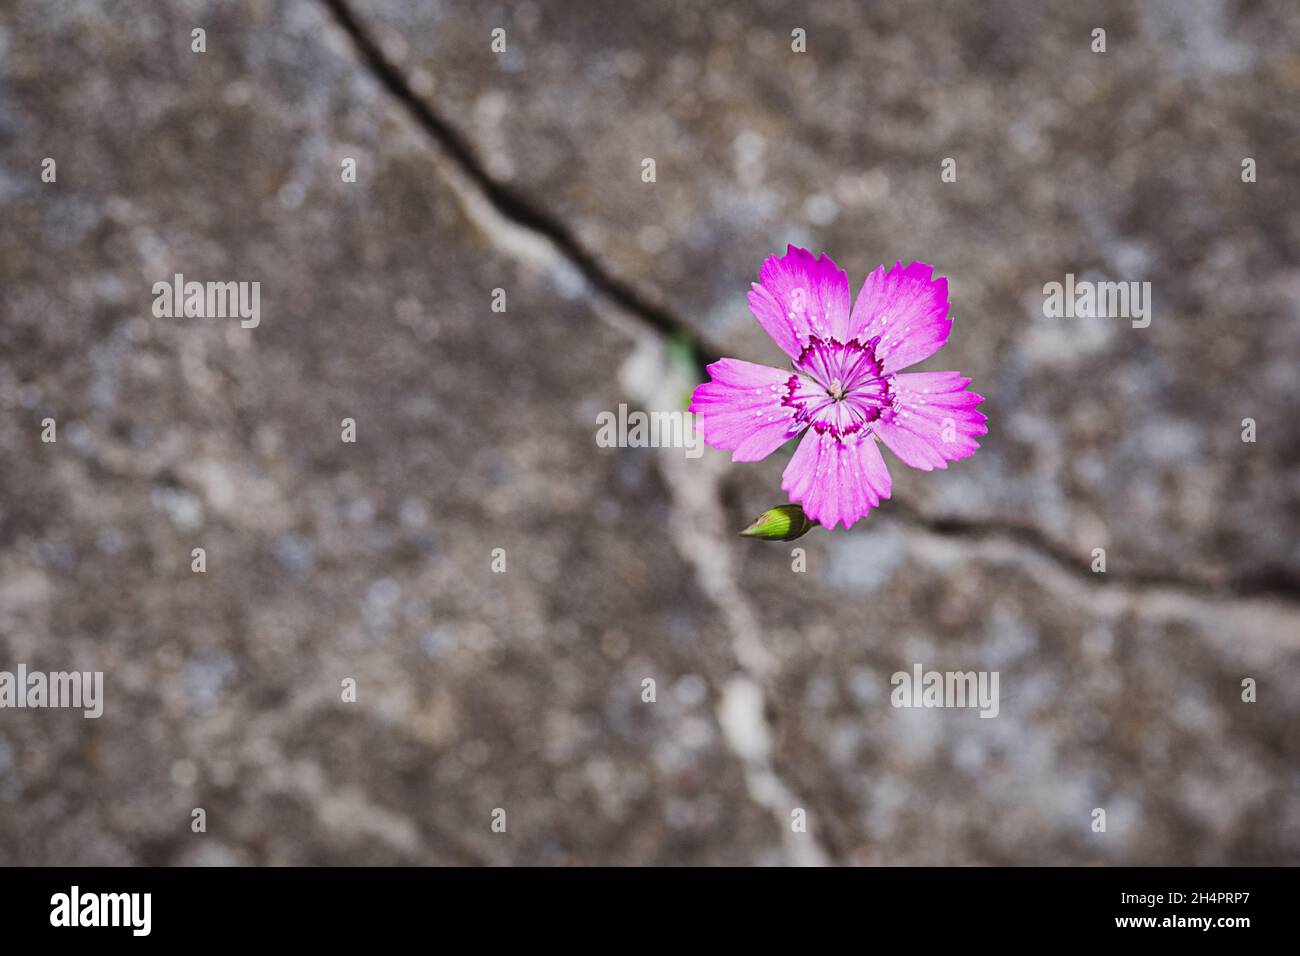 Flower growing on the rock, resilience and rebirth symbol Stock Photo